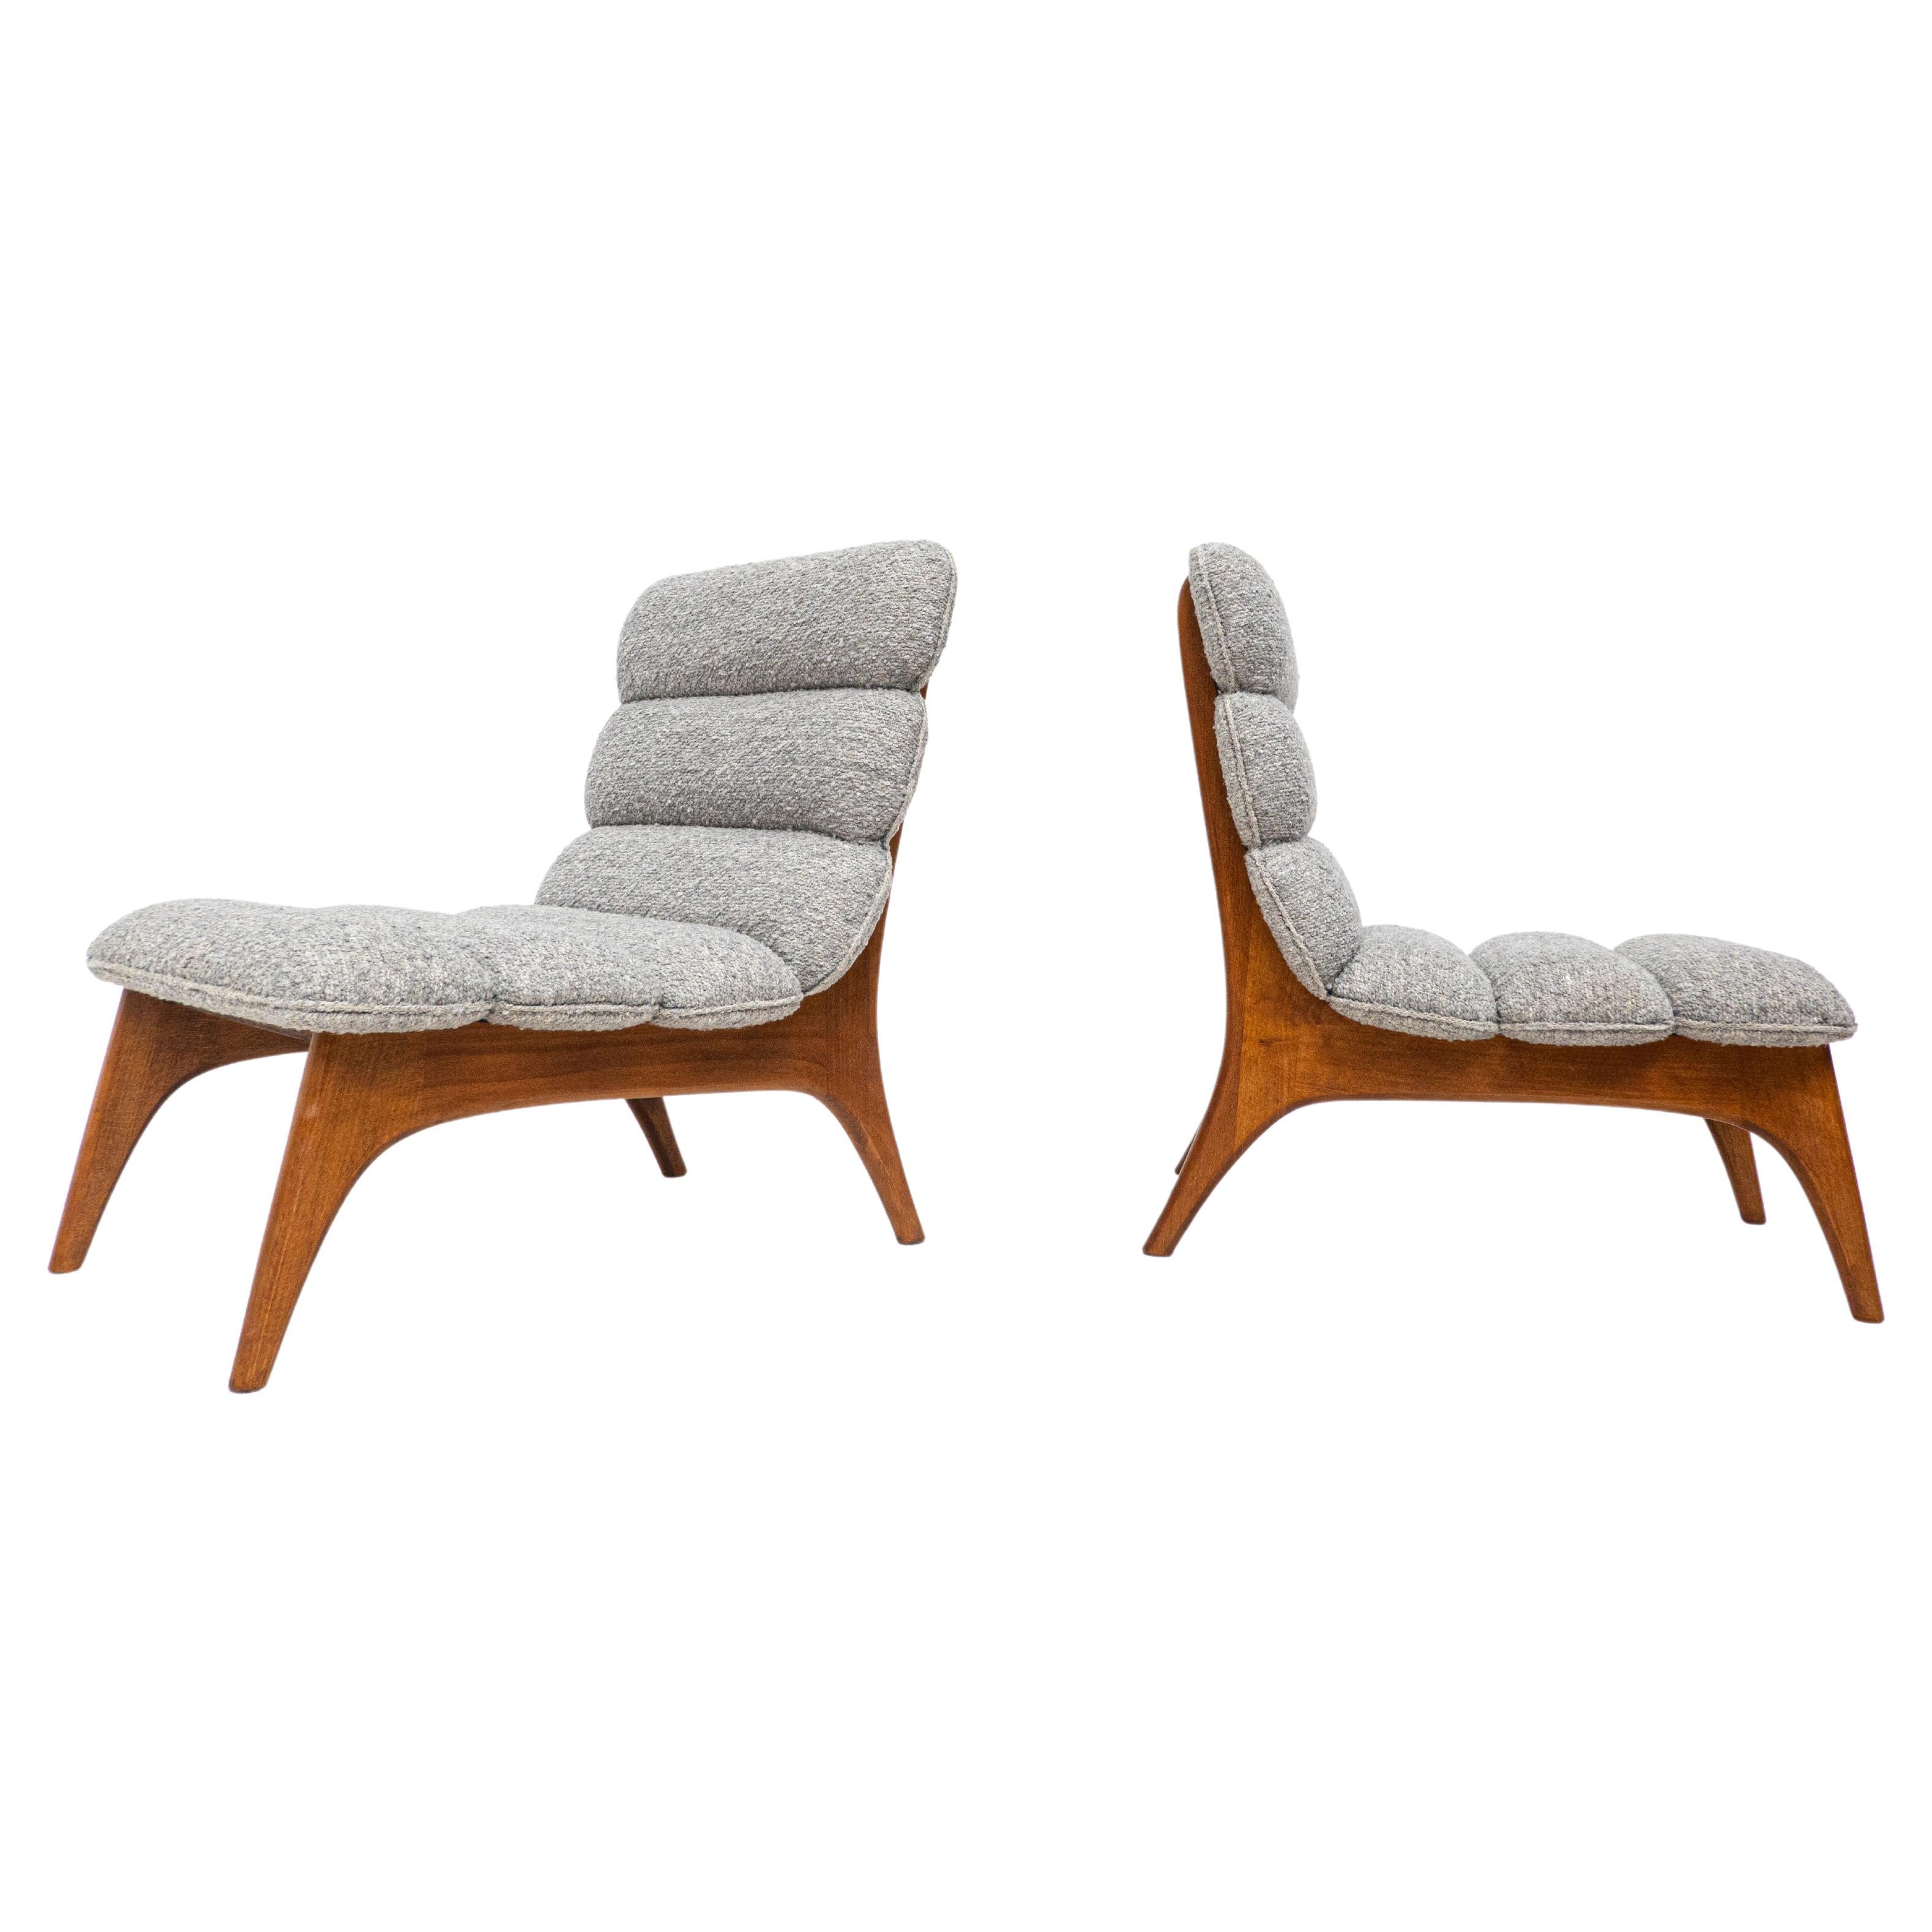 Pair of Contemporary Easy Chairs, Wood and Fabric, Italy